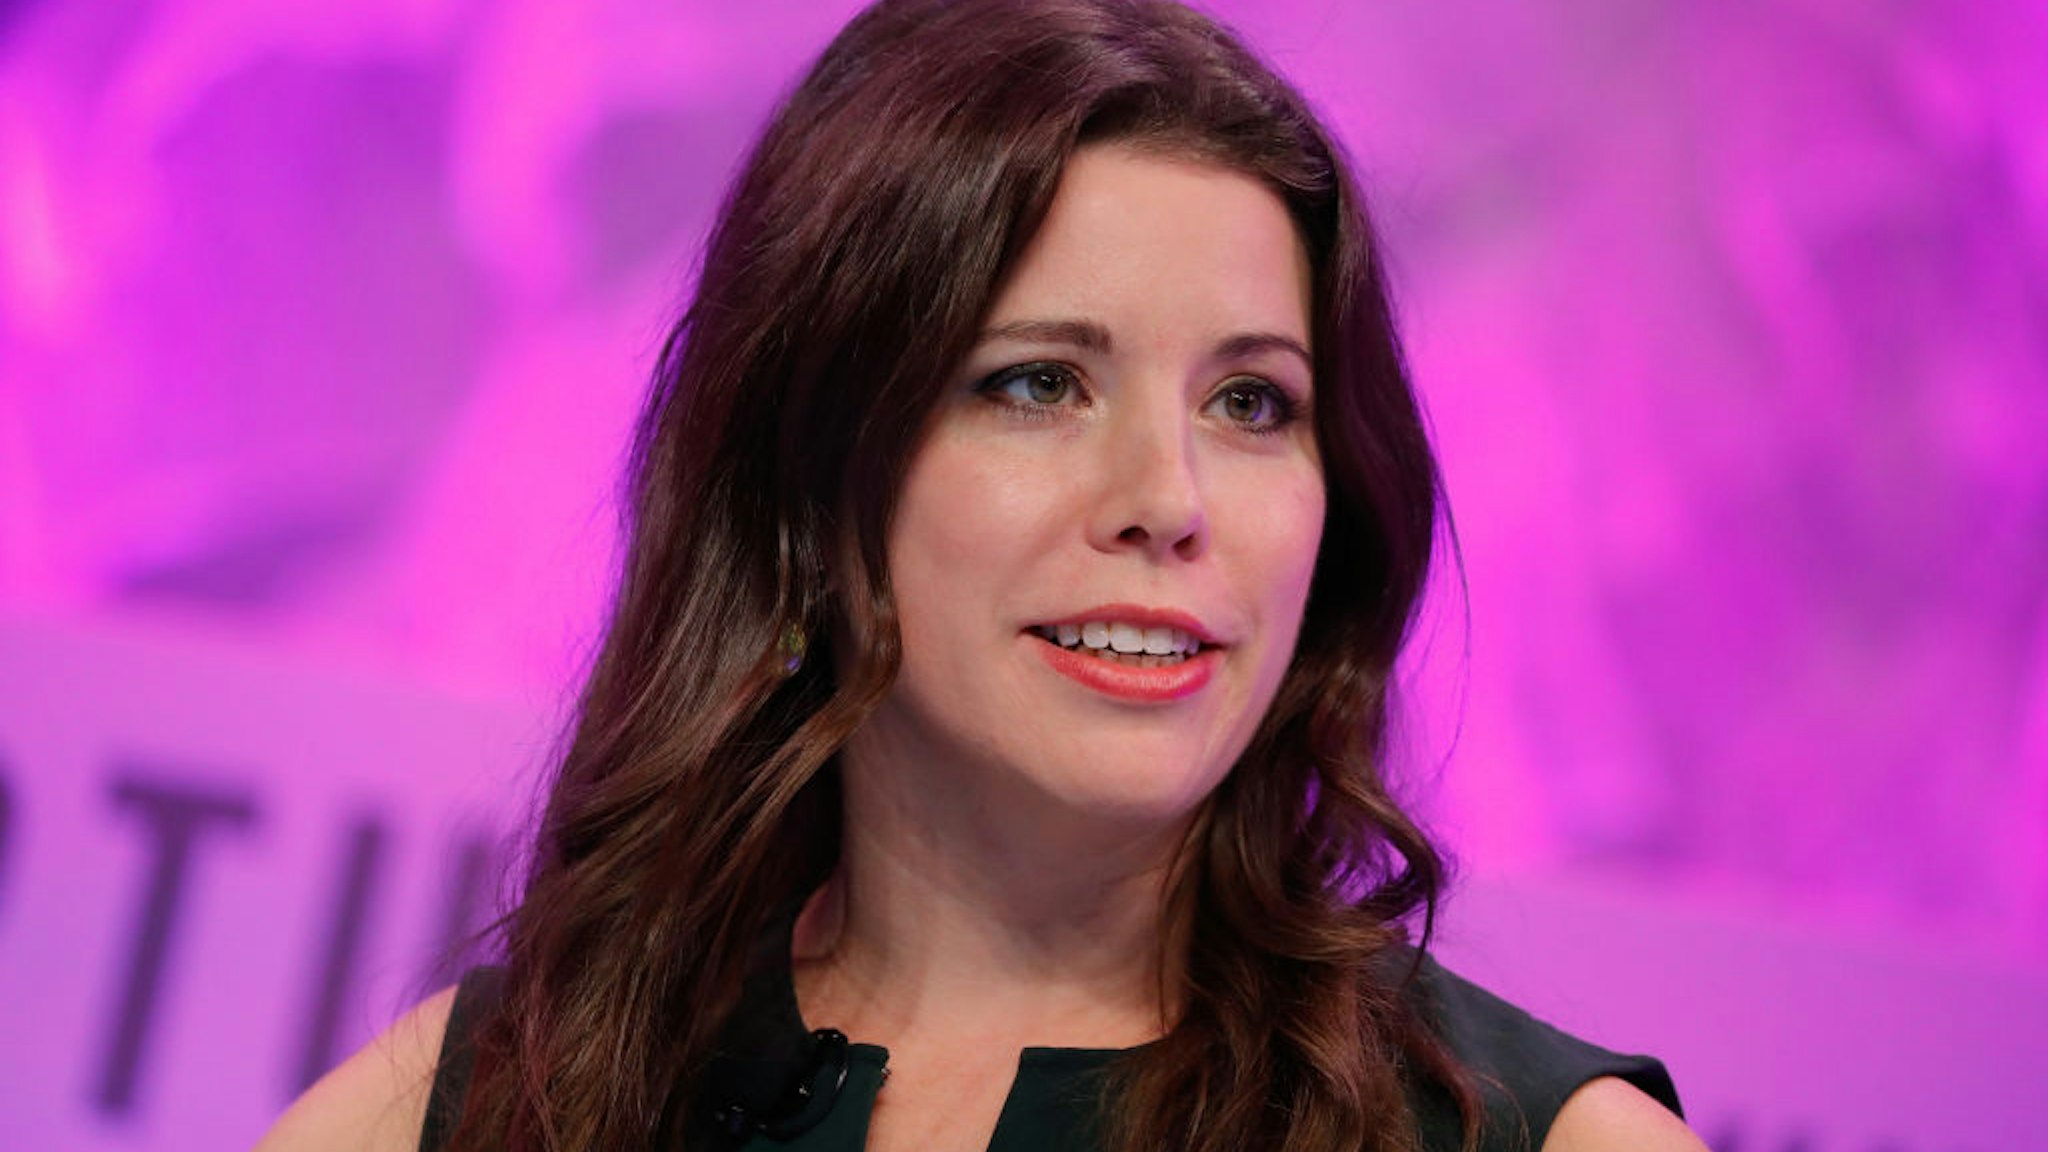 CNN Political Commentator Mary Katharine Ham speaks onstage at the Fortune Most Powerful Women Summit - Day 3 on October 11, 2017 in Washington, DC.